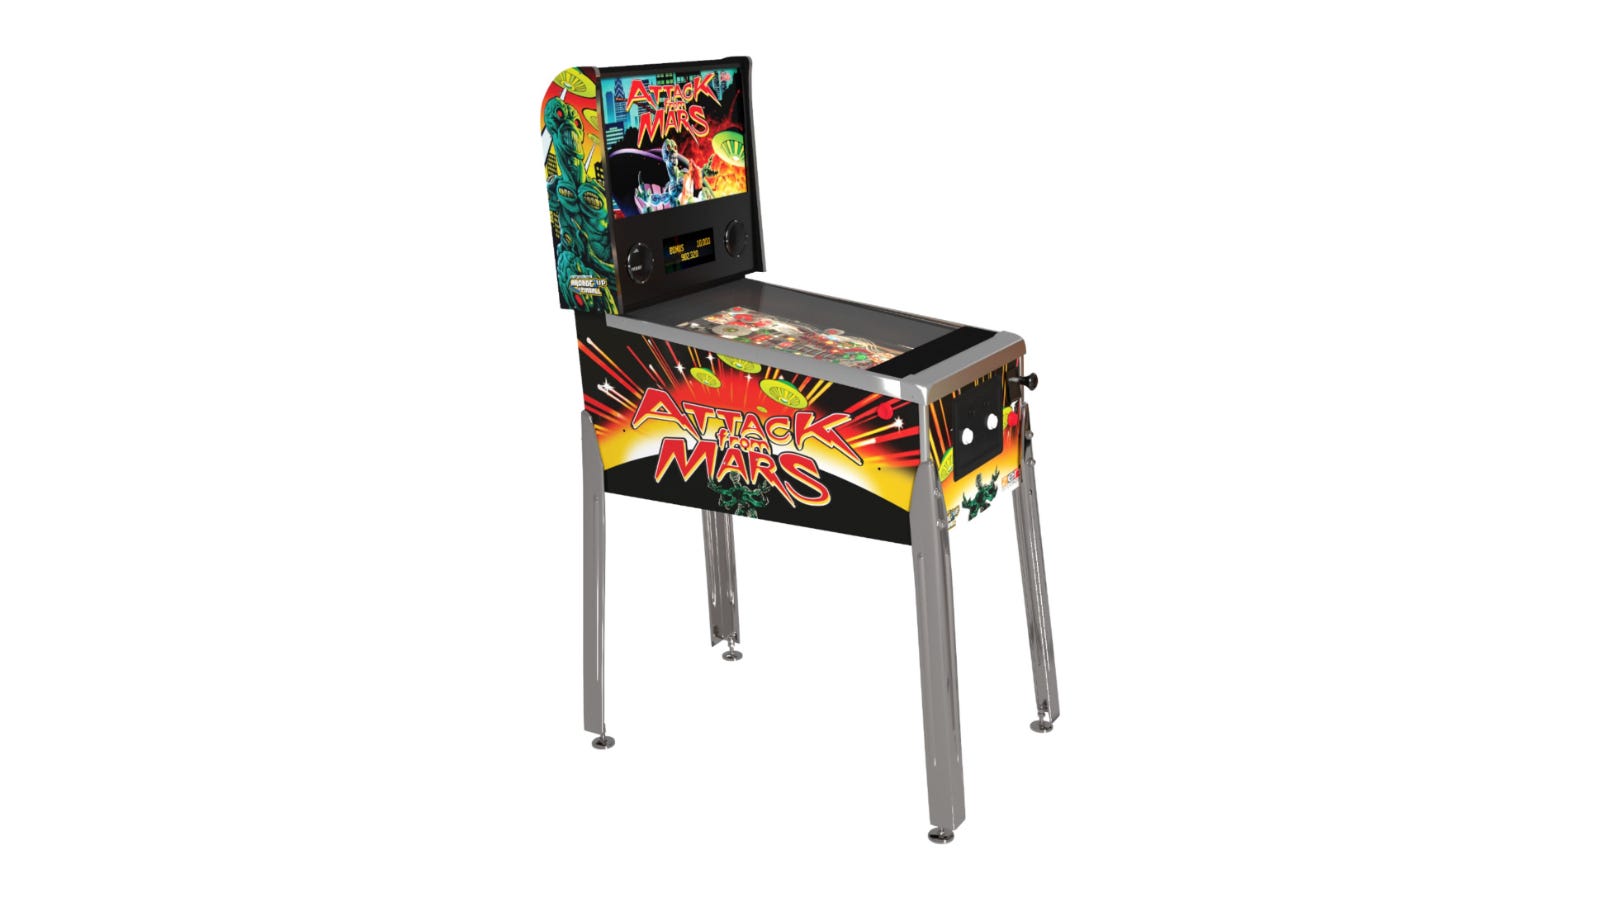 A digital pinball machine with an exterior design that screams Attack on Mars, with artwork faithful to the original game